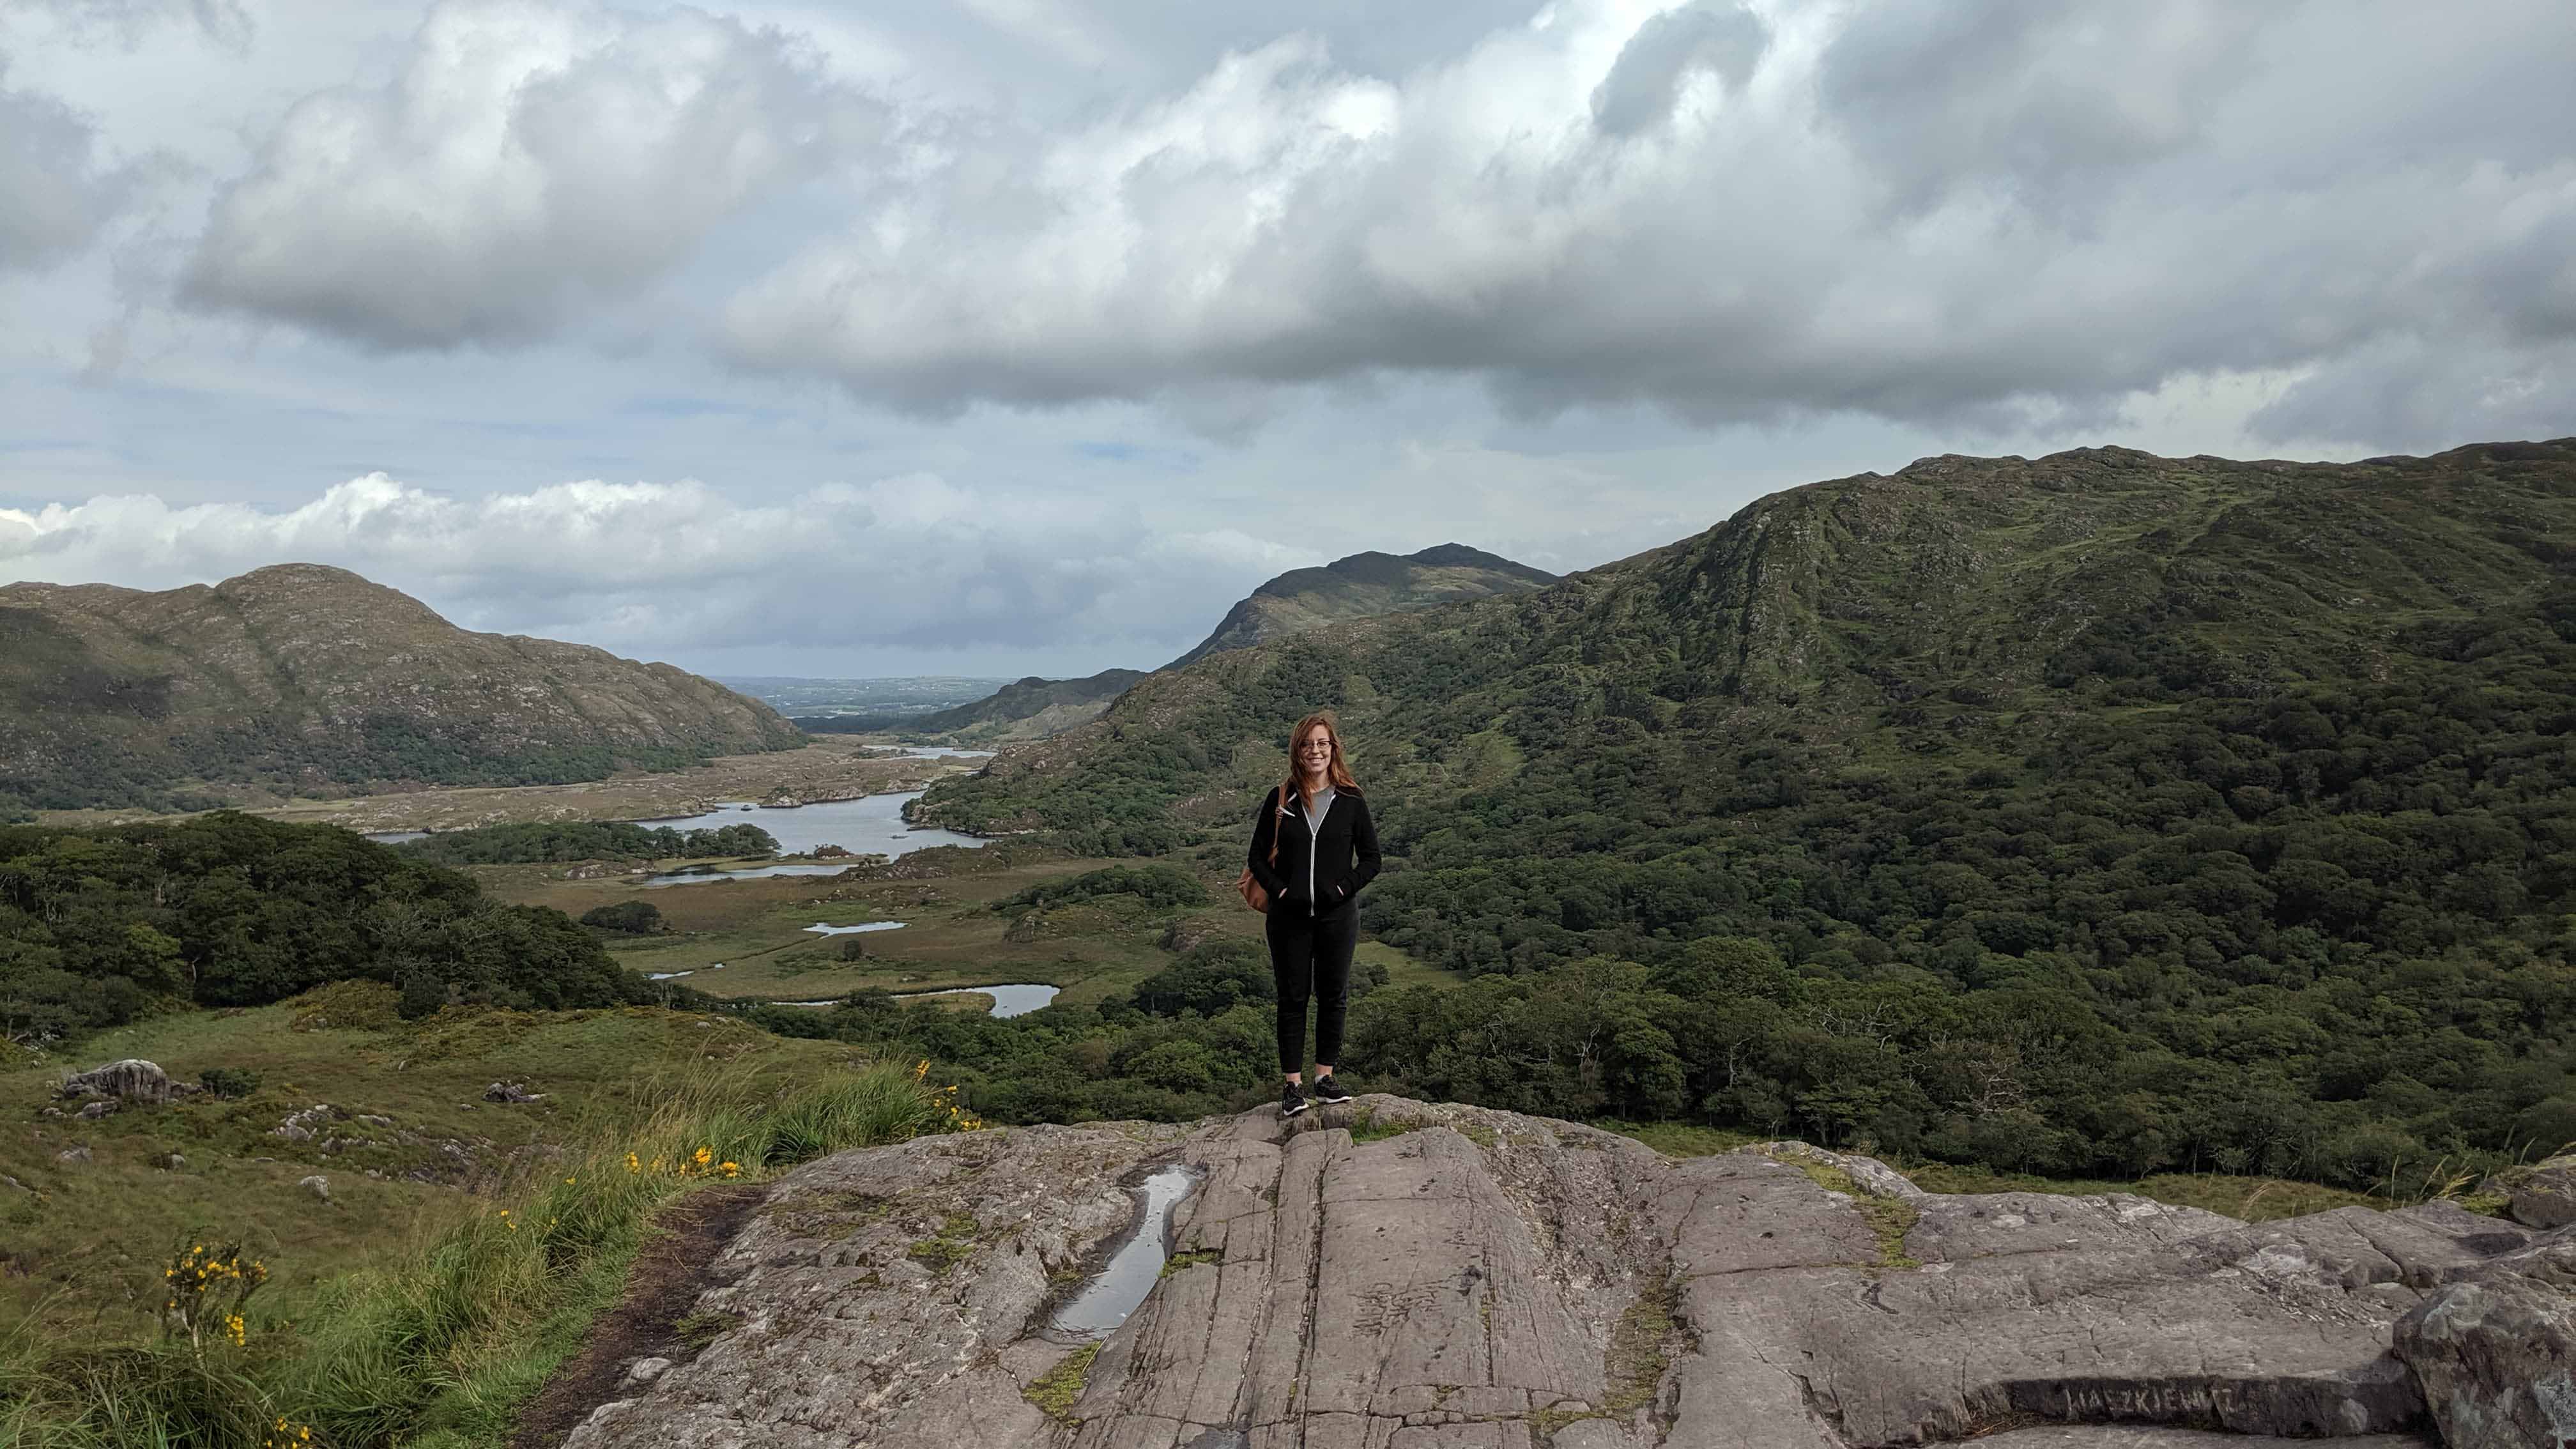 Student stands on cliff overlooking a lush valley